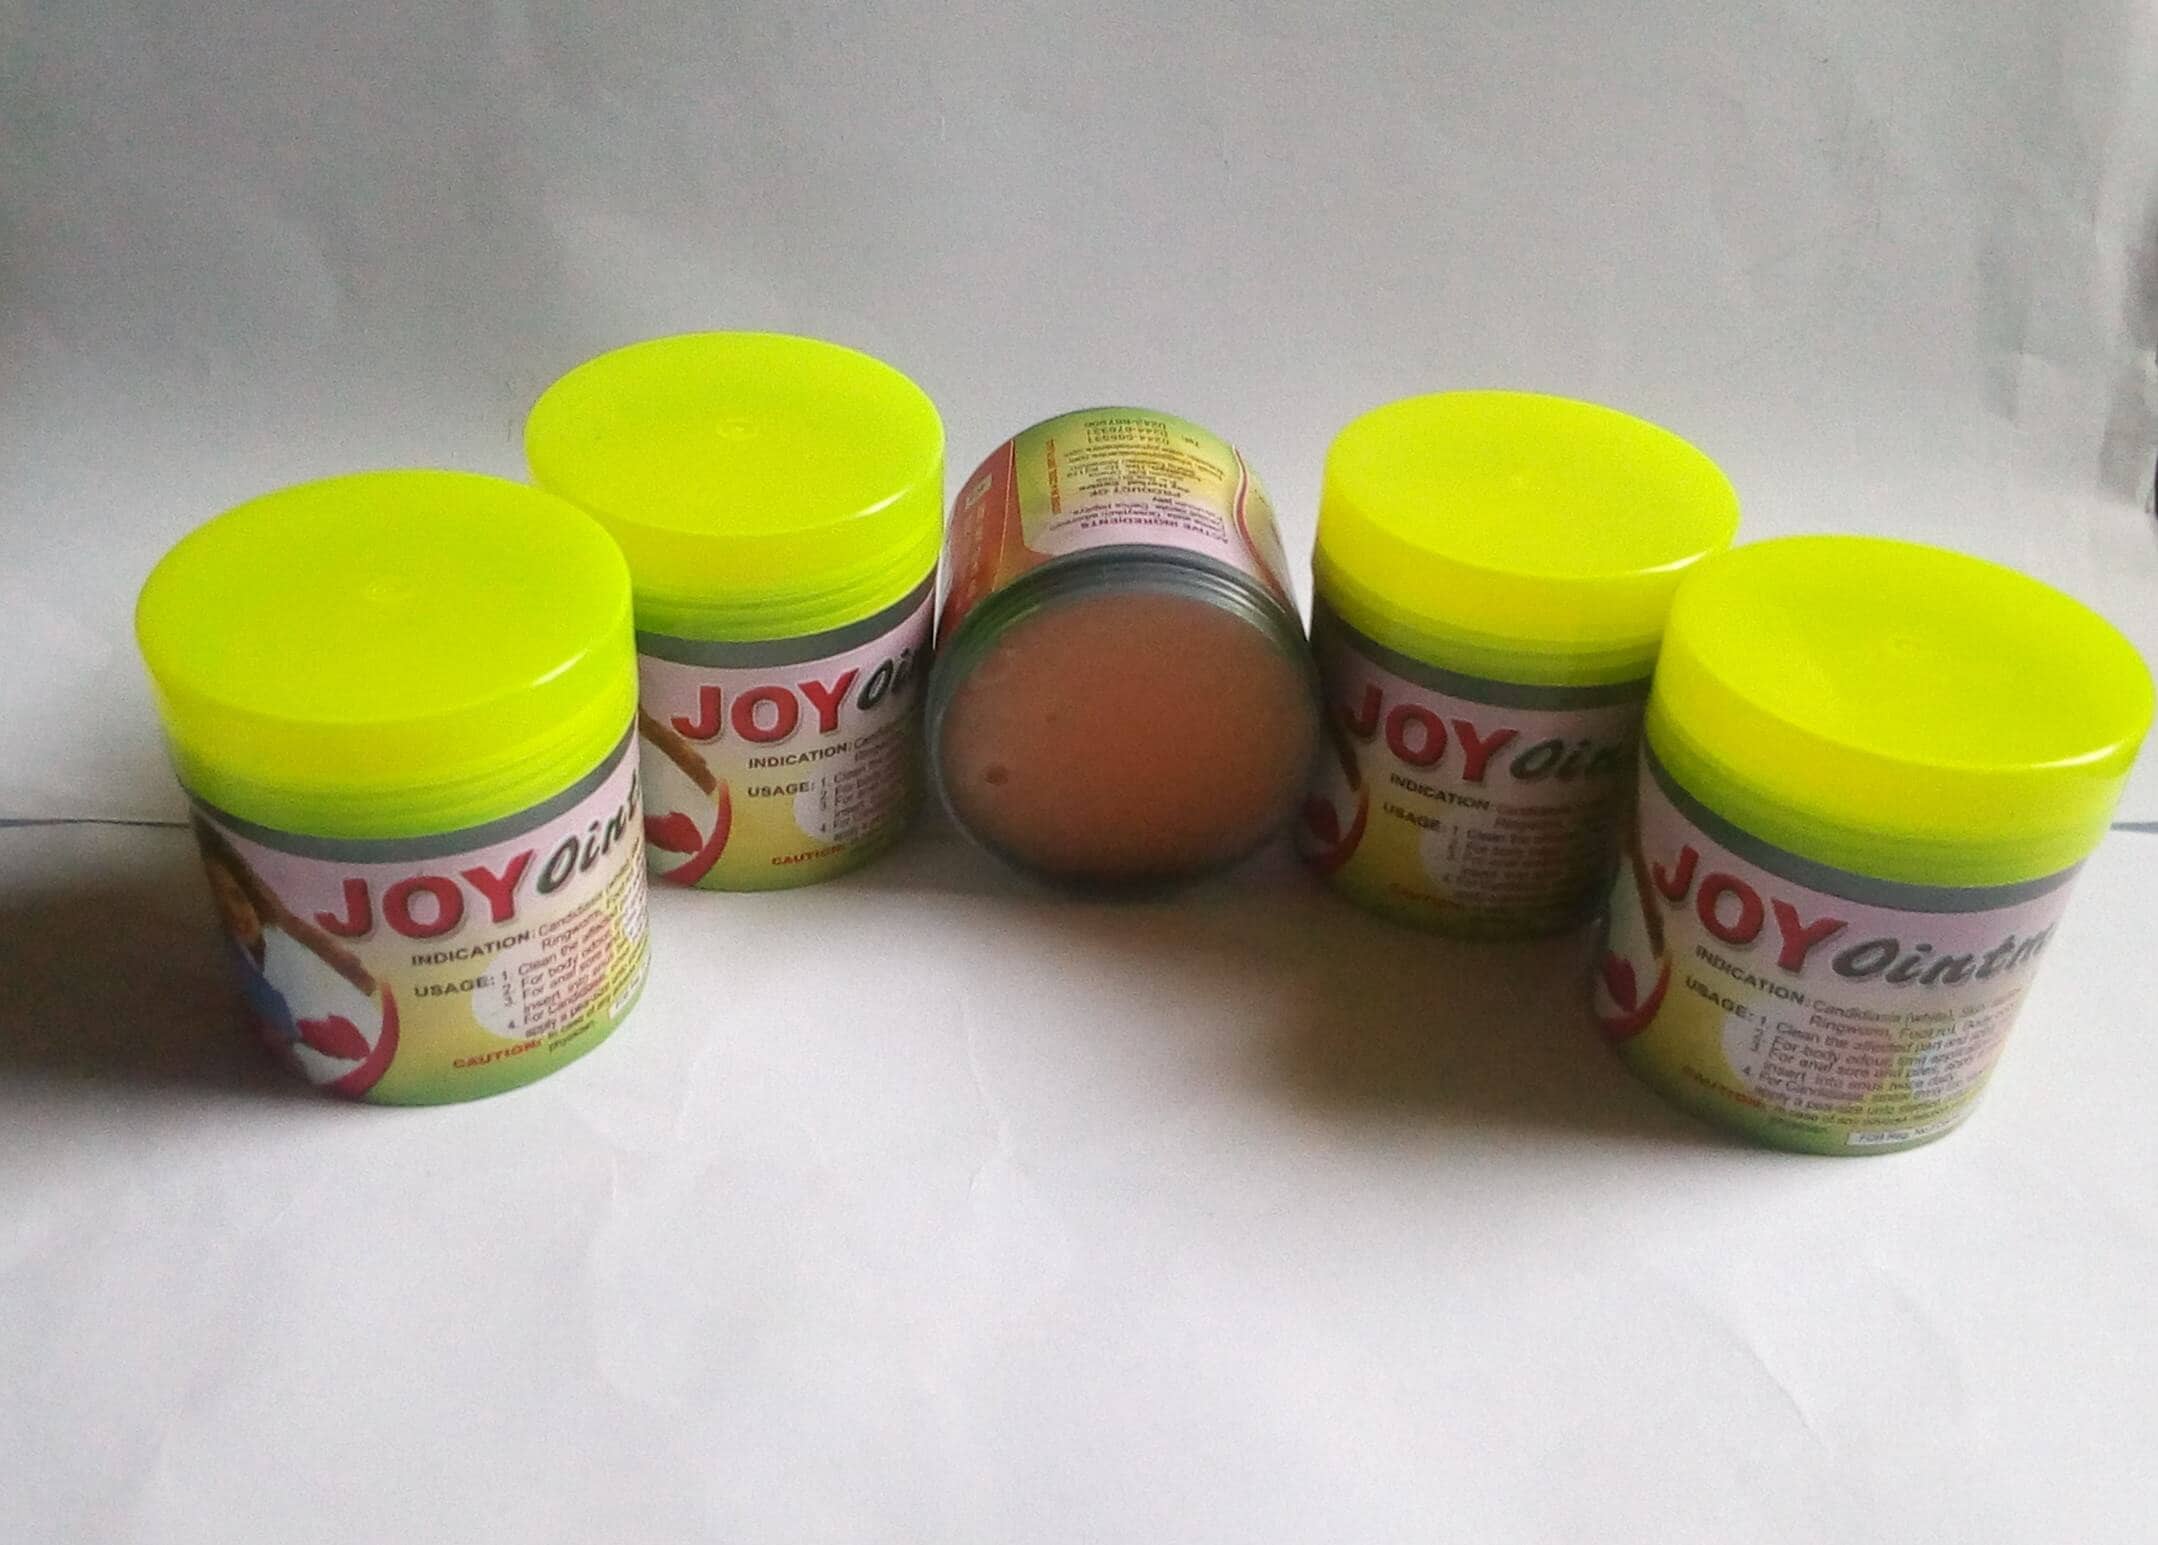 Joy ointment for hand and body cream | Etsy